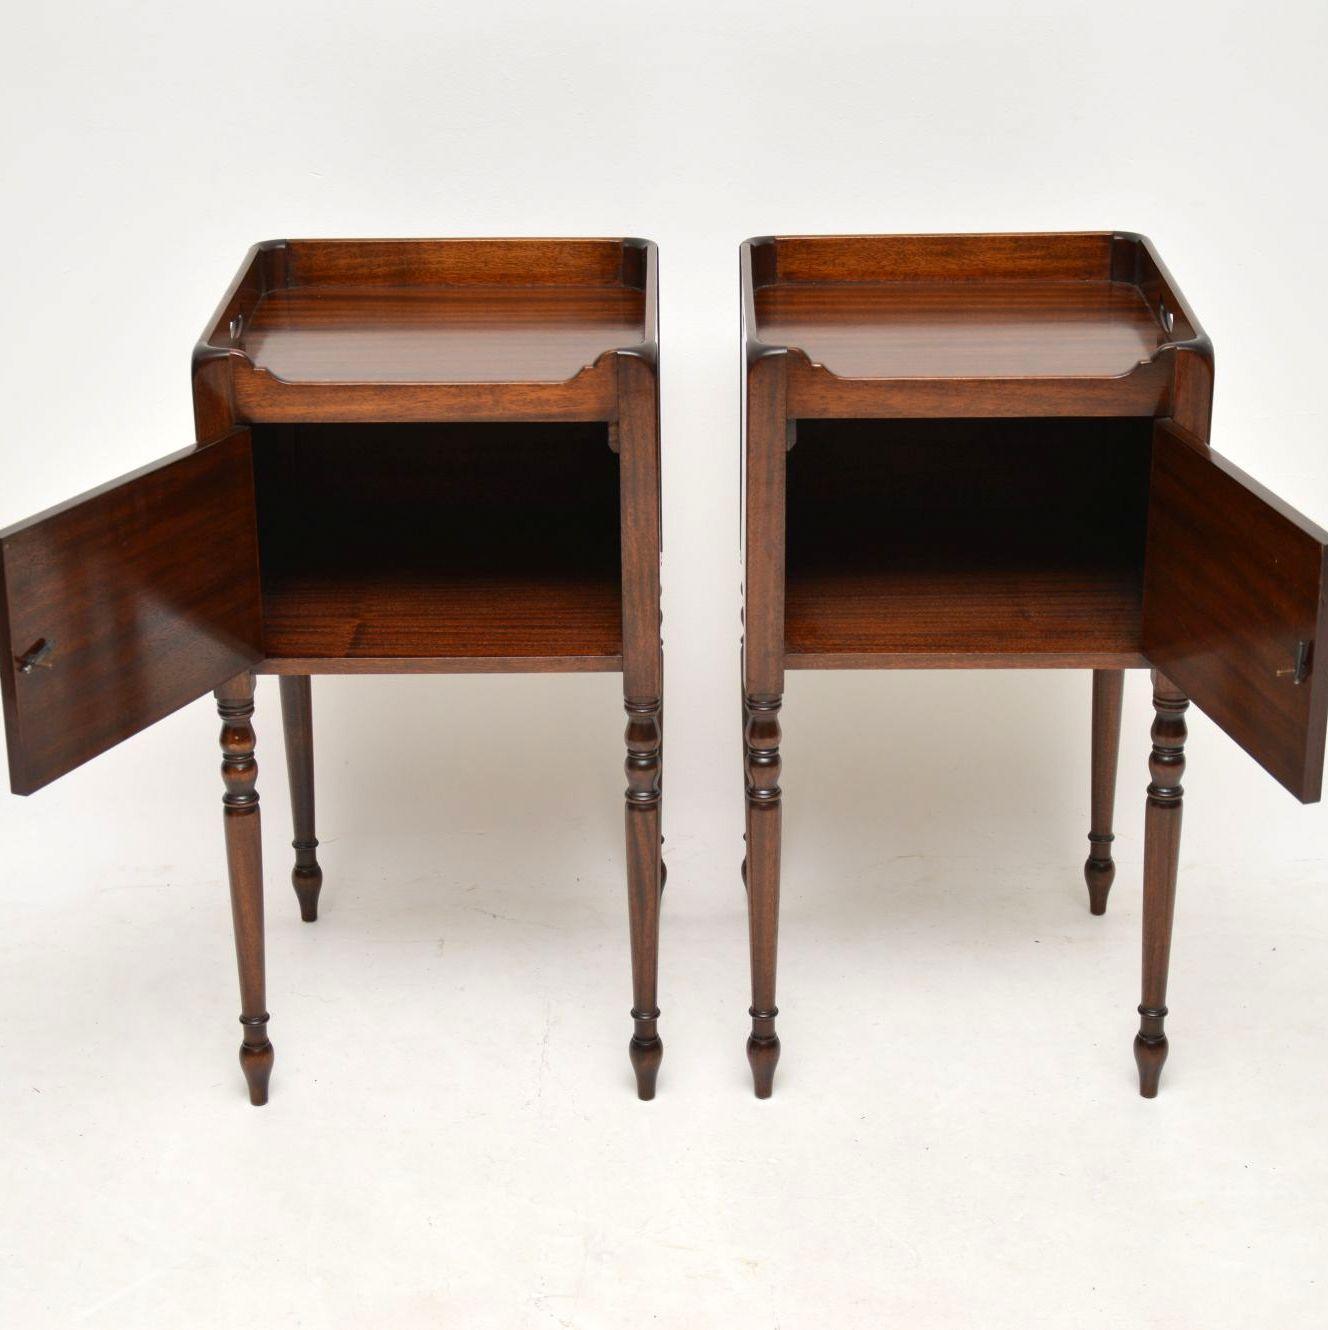 Pair of Antique Inlaid Mahogany Bedside Cabinets im Zustand „Gut“ in London, GB